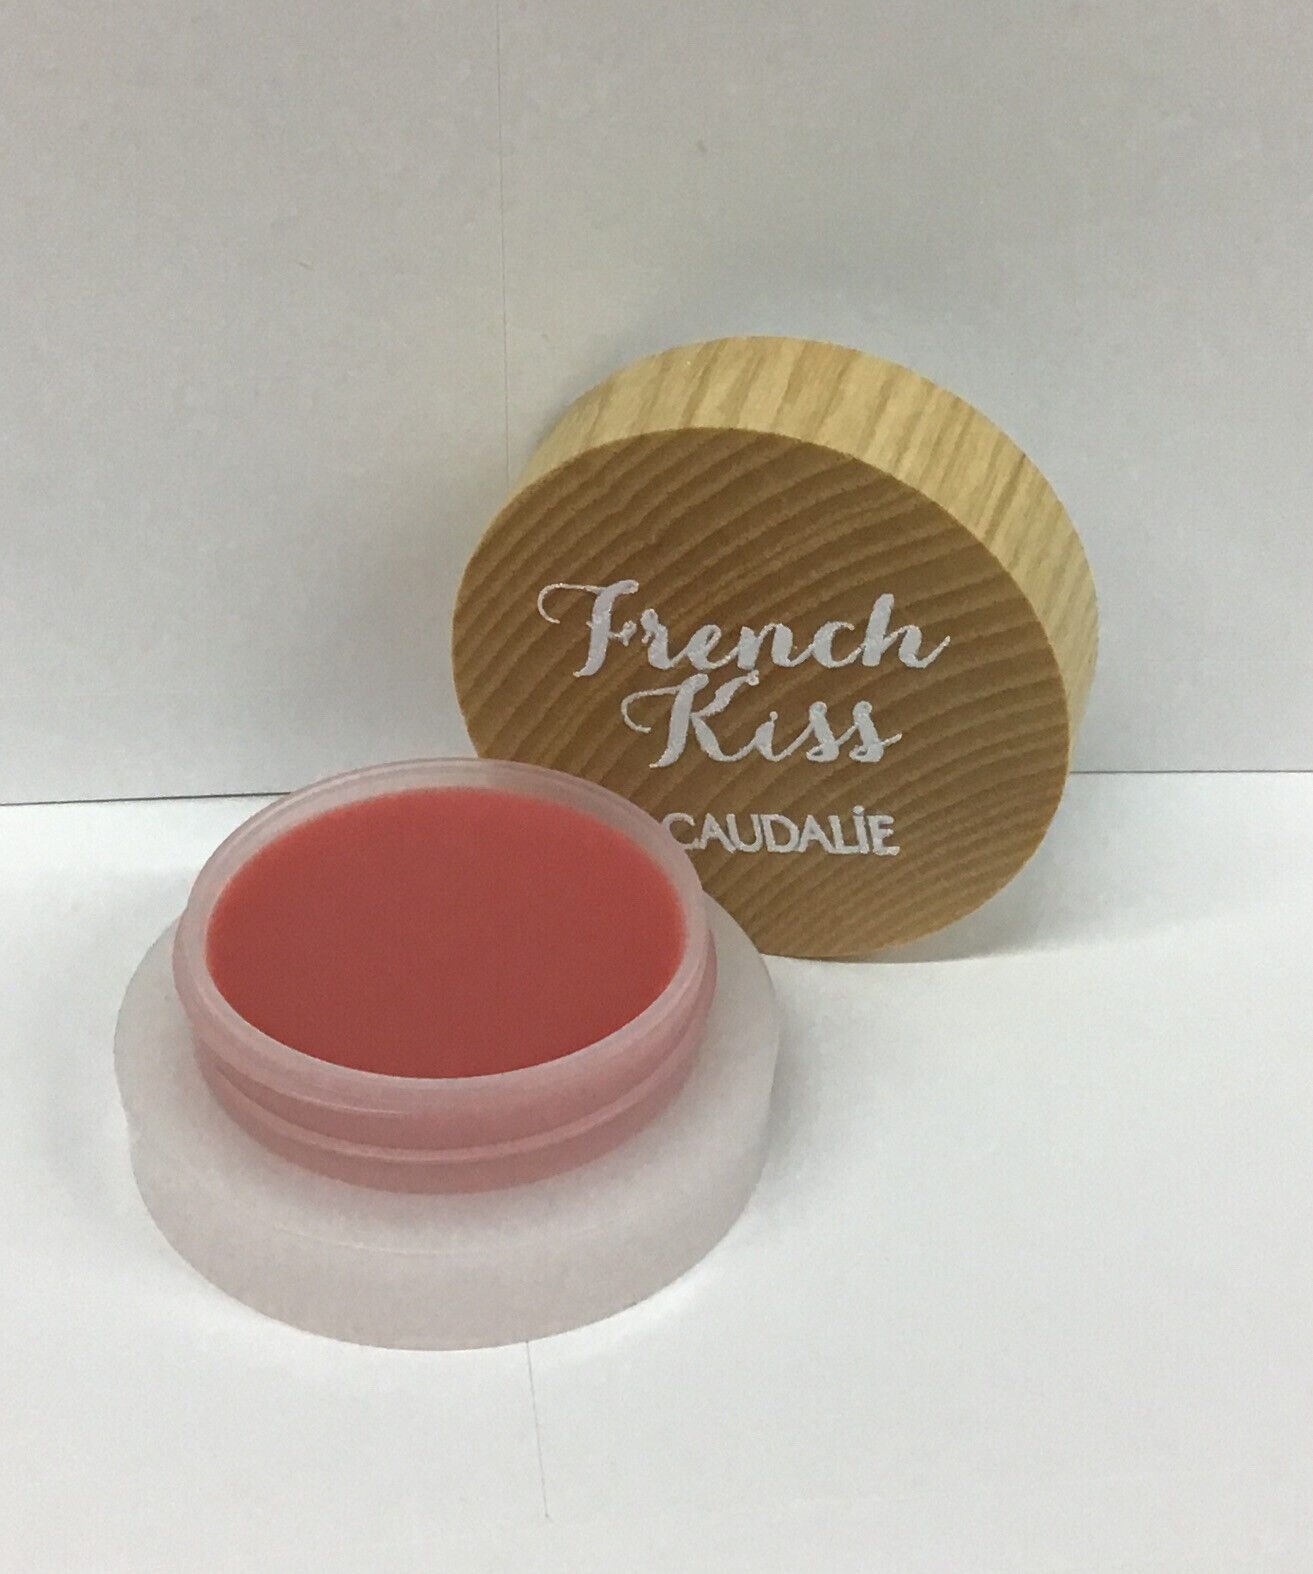 Caudalie French Kiss Tinted Lip Balm - Innocence .26 Oz, As pictured.